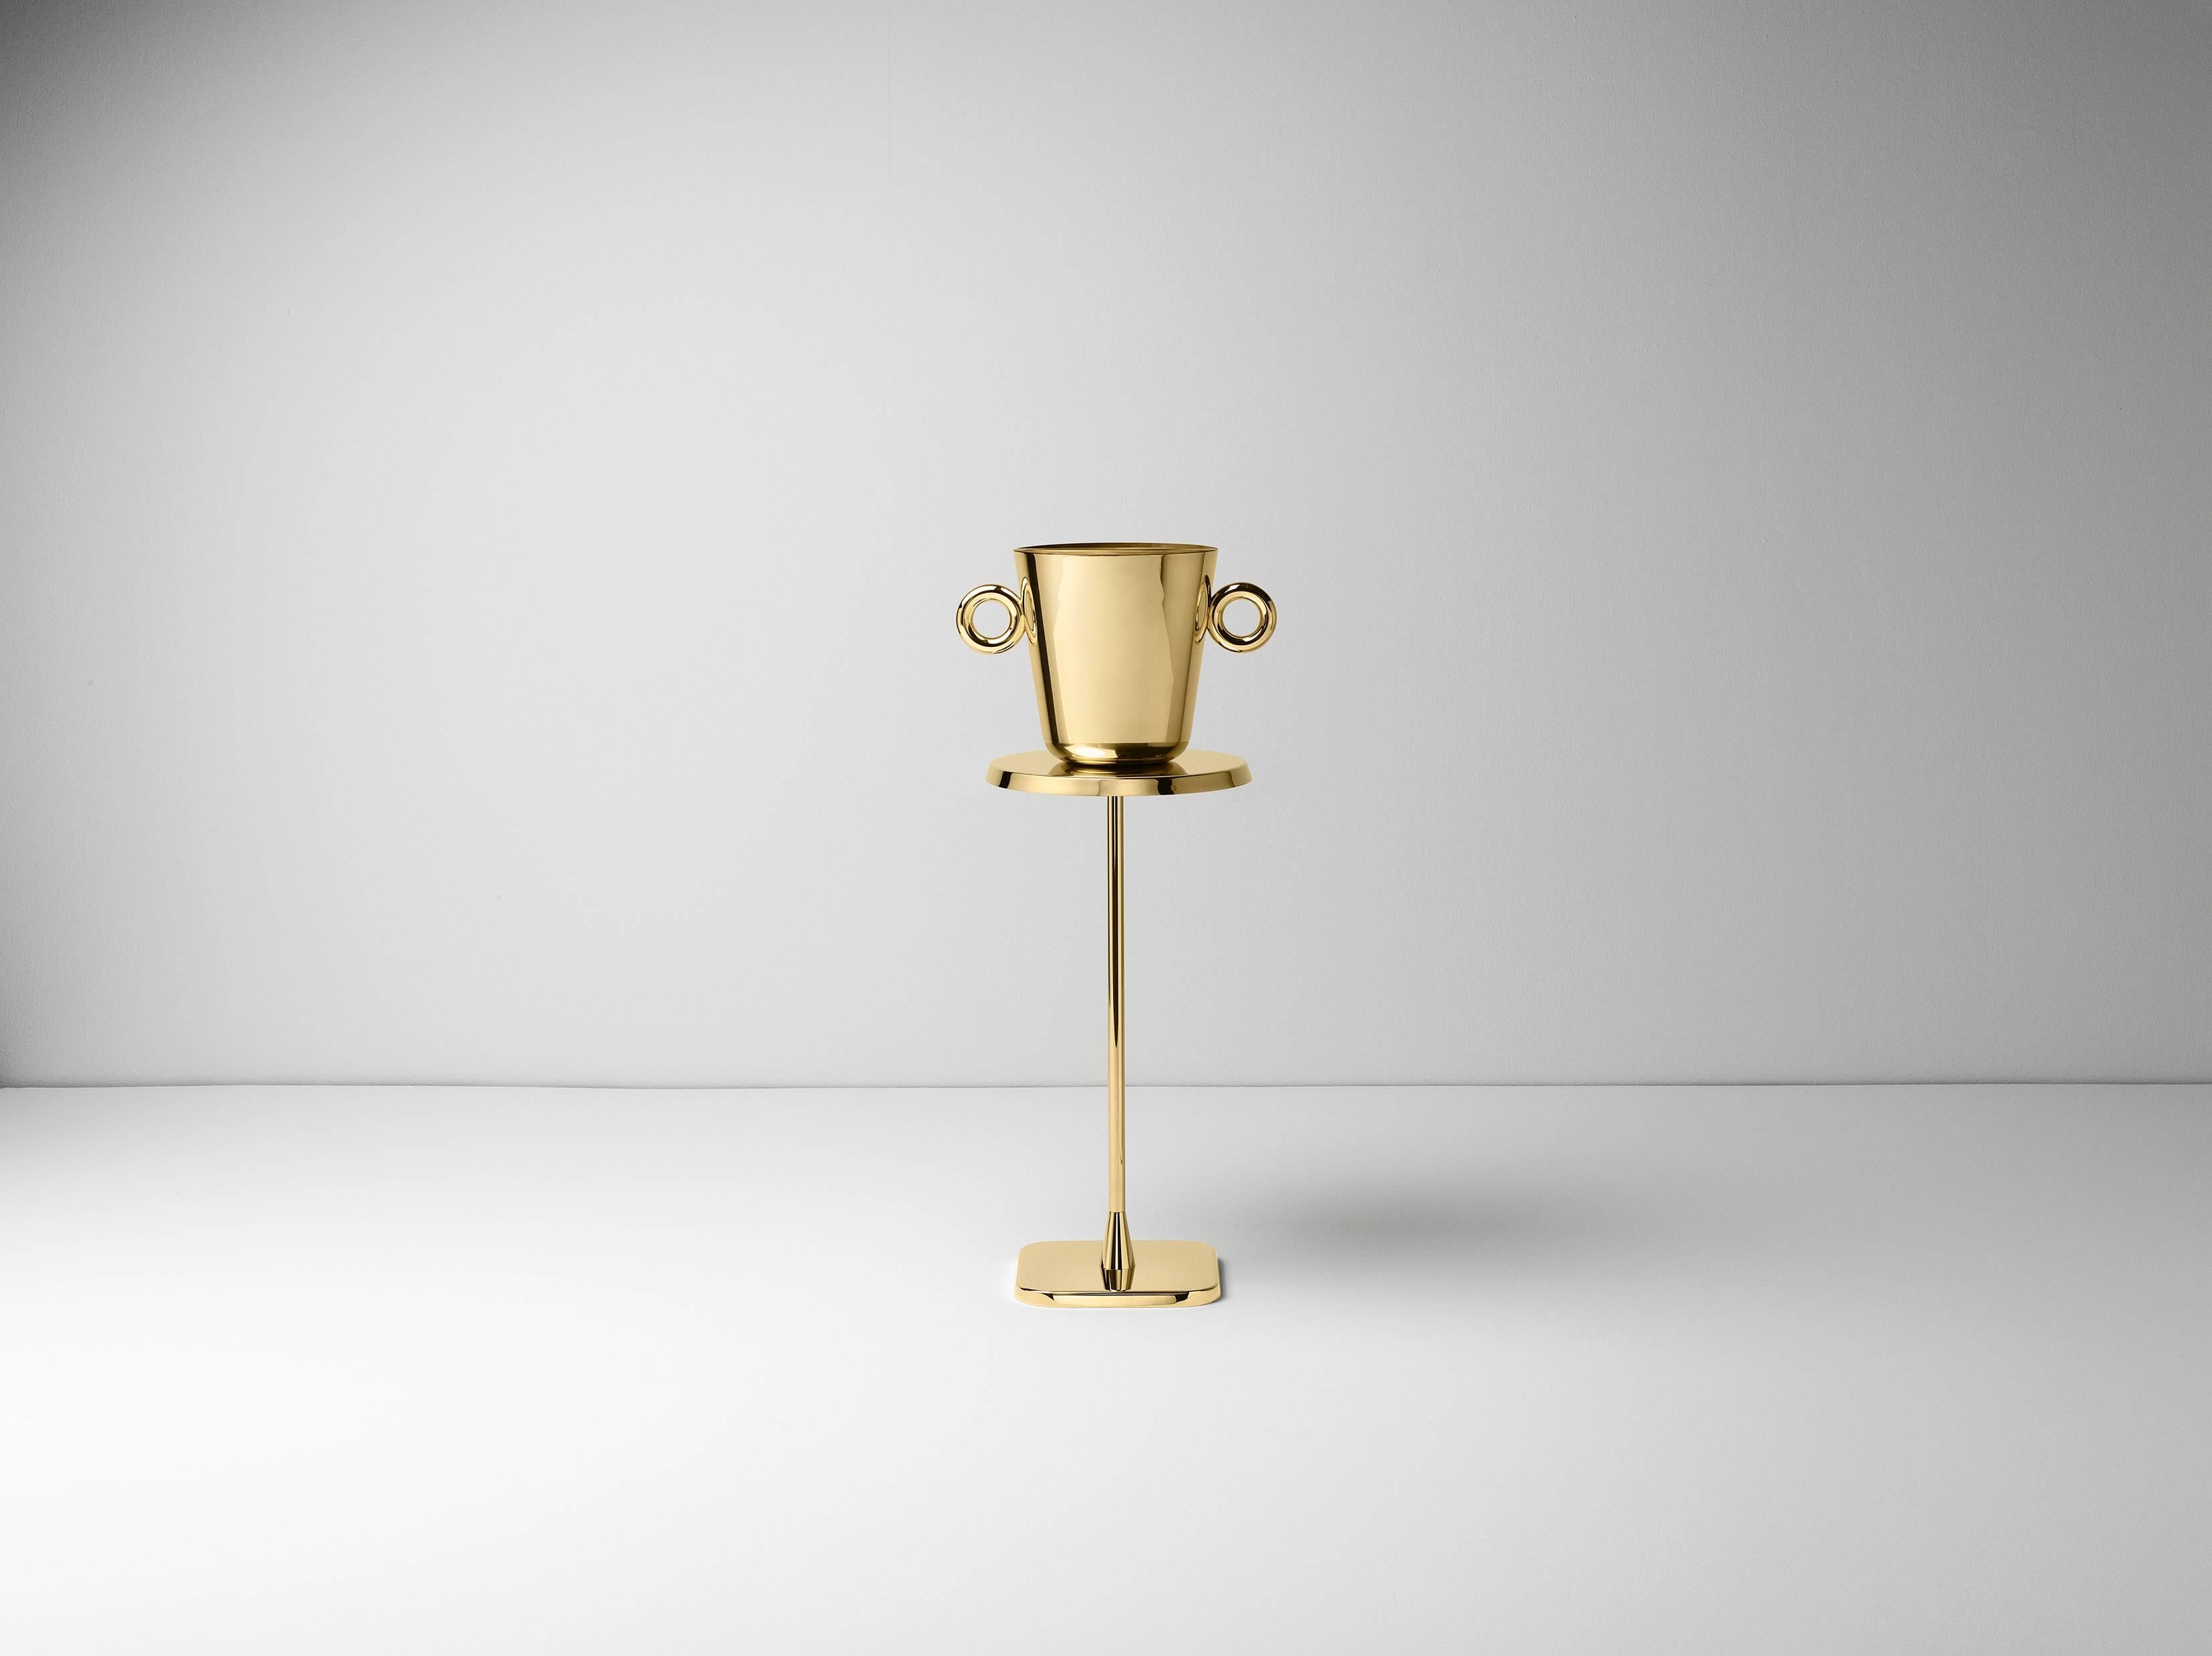 Ice bucket in casted polished brass designed by Richard Hutten.